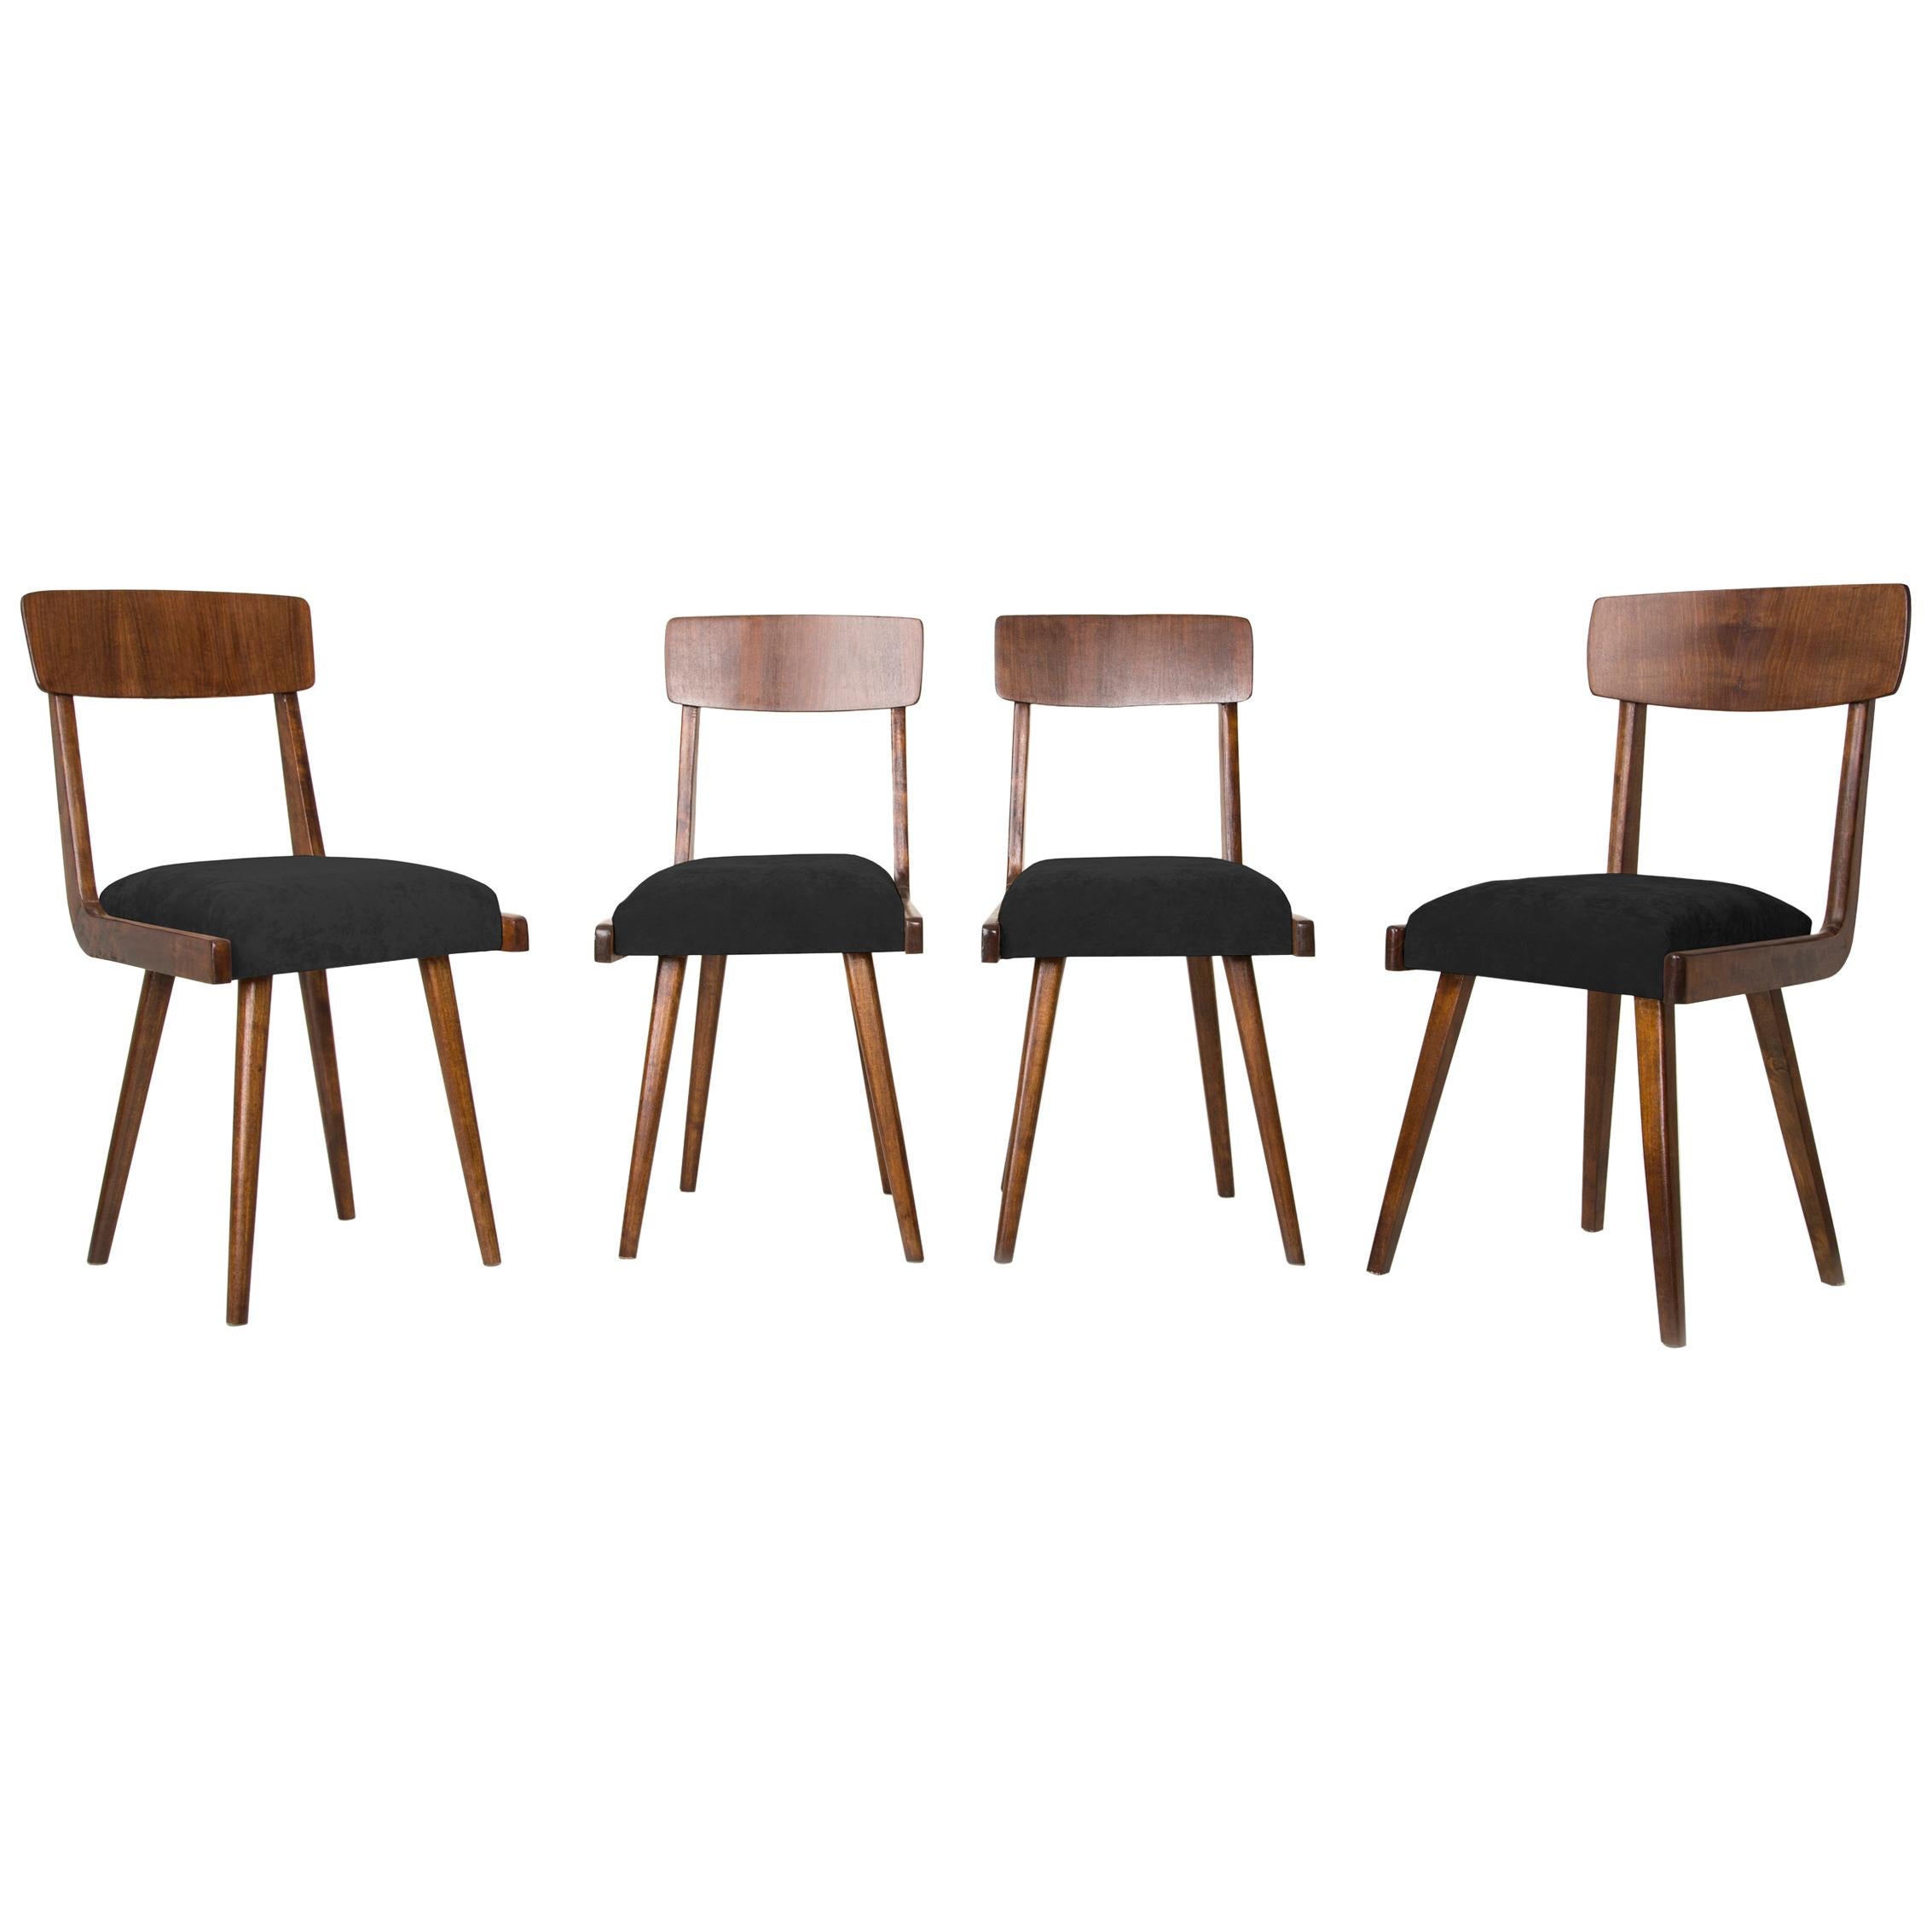 Set of Four 20th Century Black Wood Chairs, 1960s For Sale